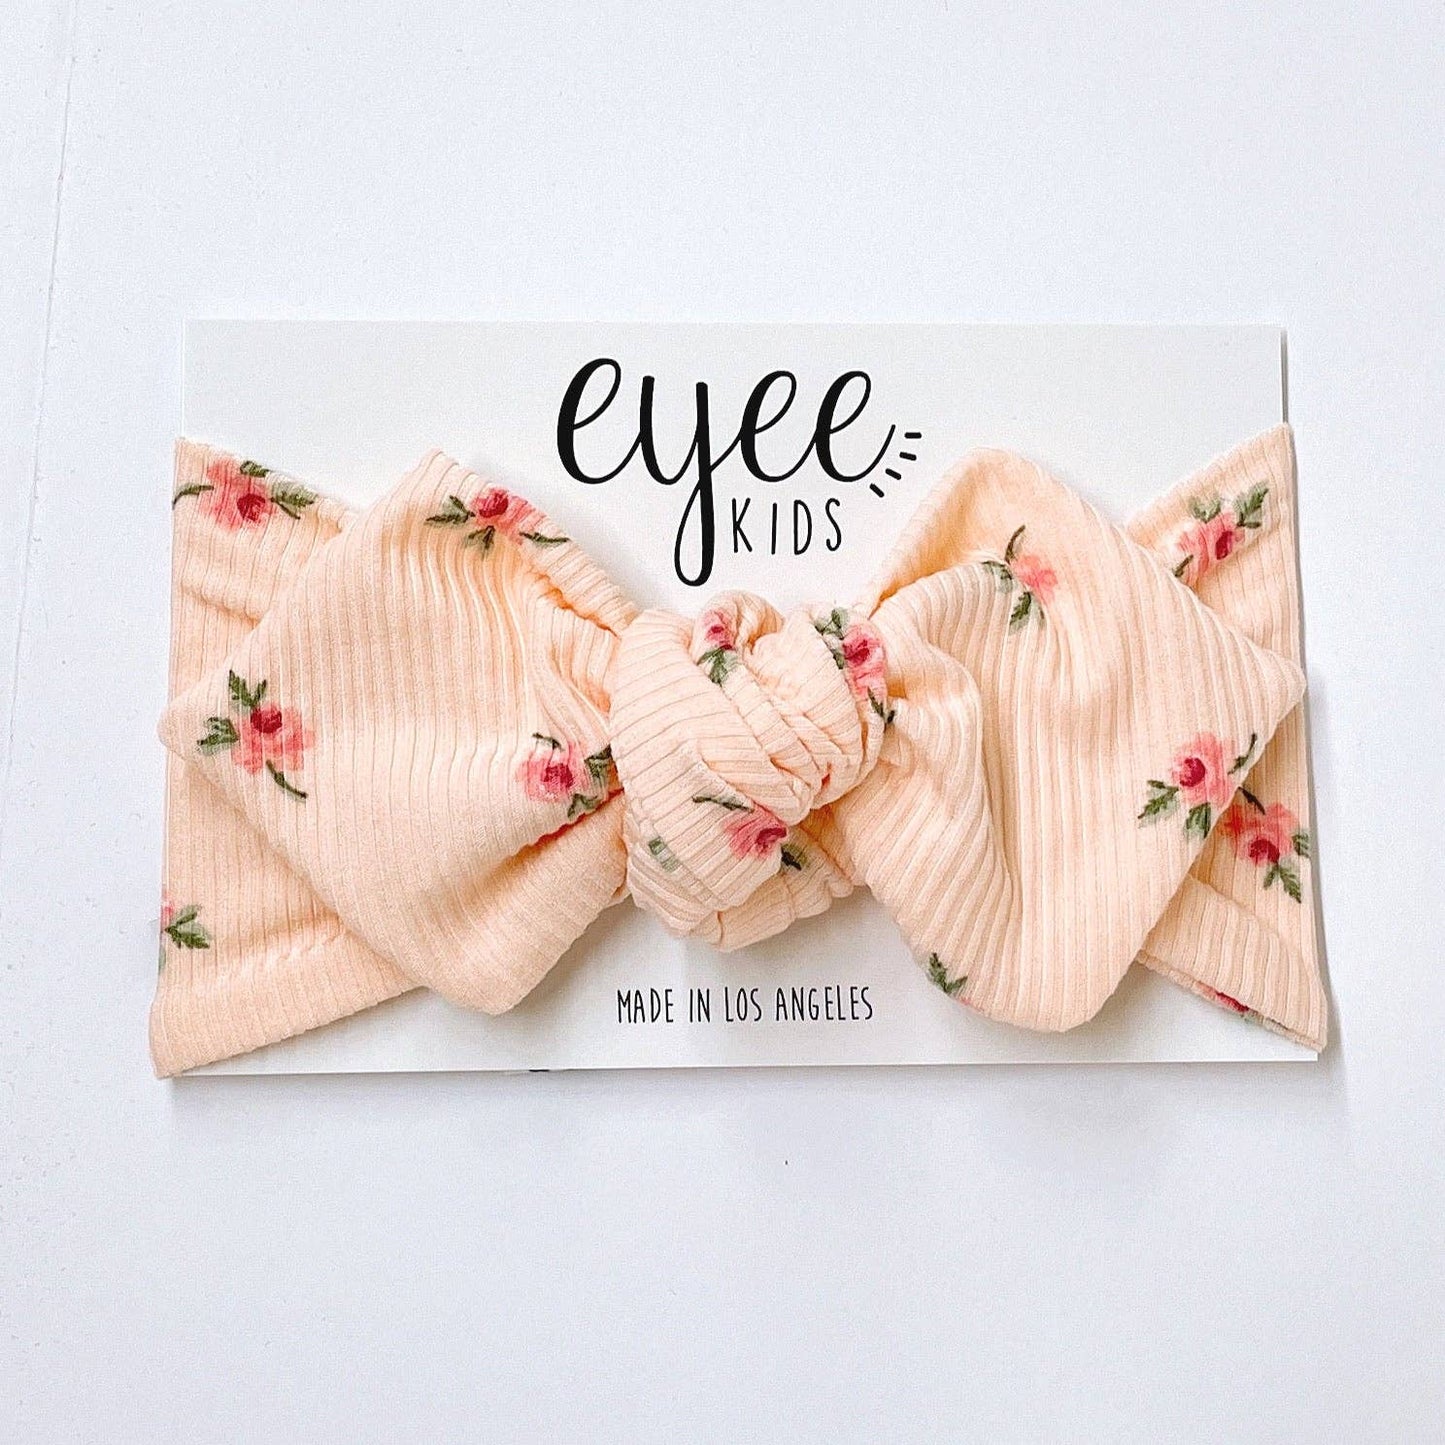 Top Knot Headband - Peach Florals (Ribbed Knit)